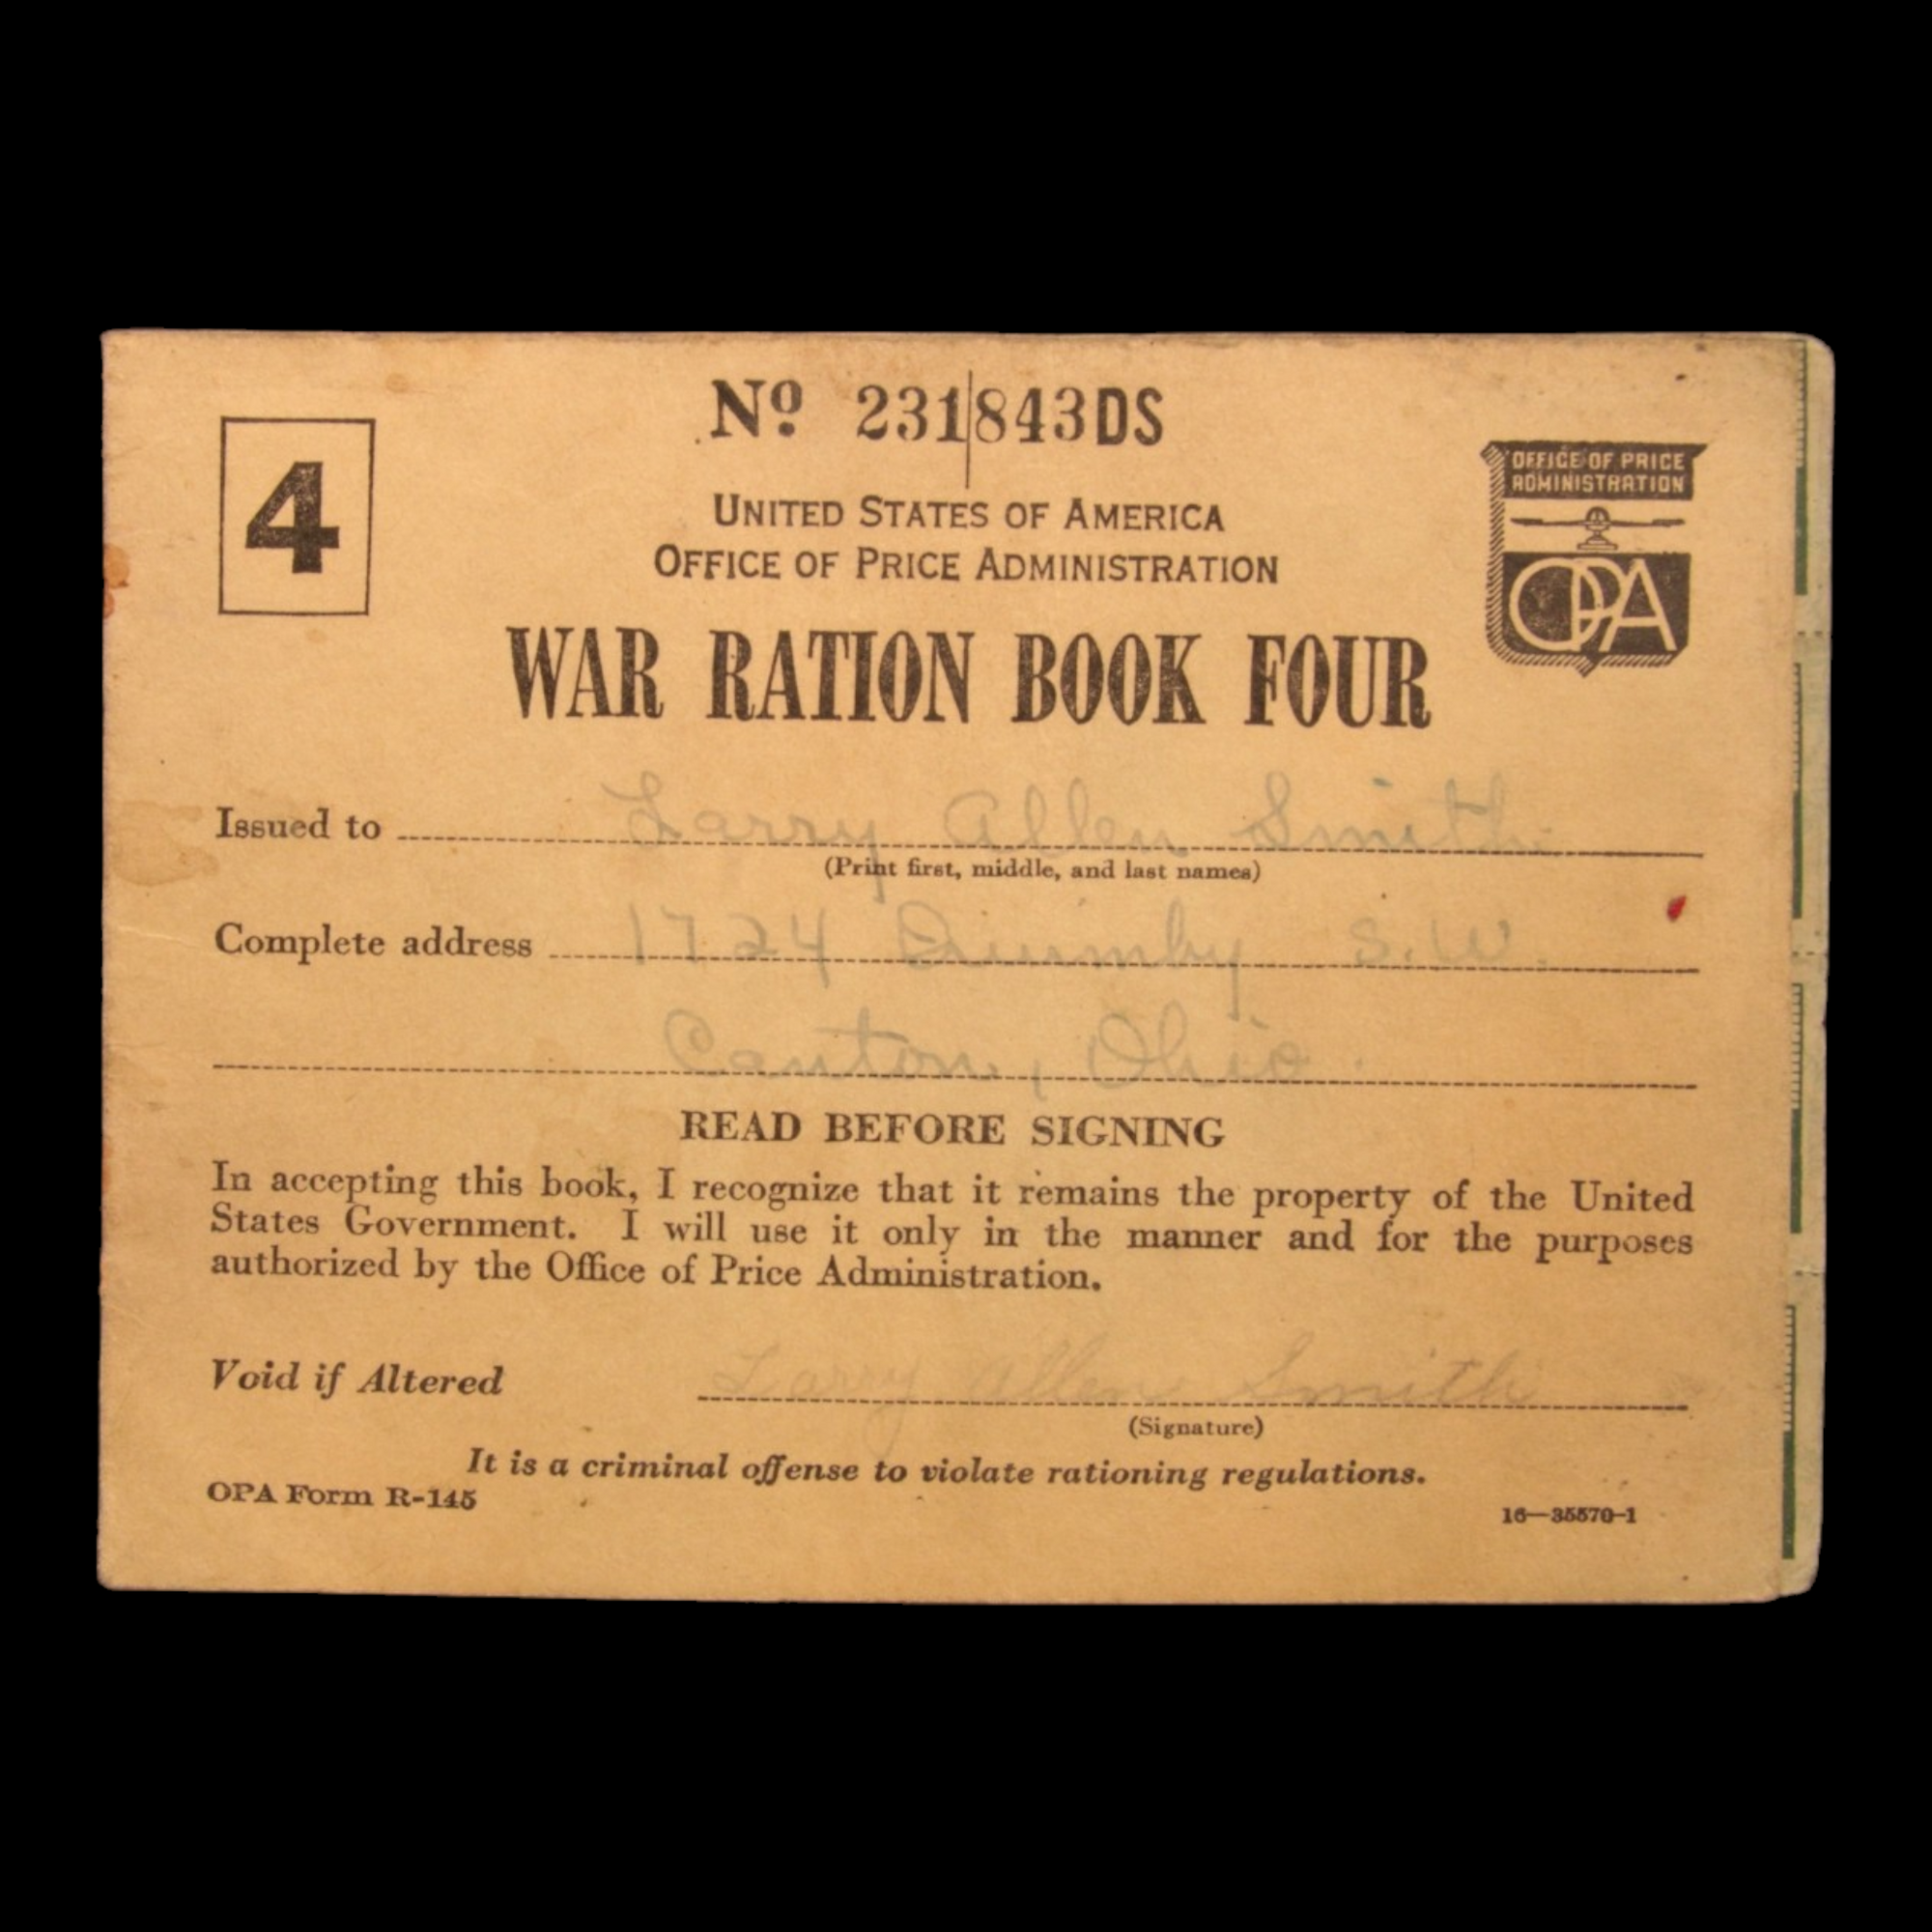 WWII US War Ration Books Three and Four - 1940s - World War II